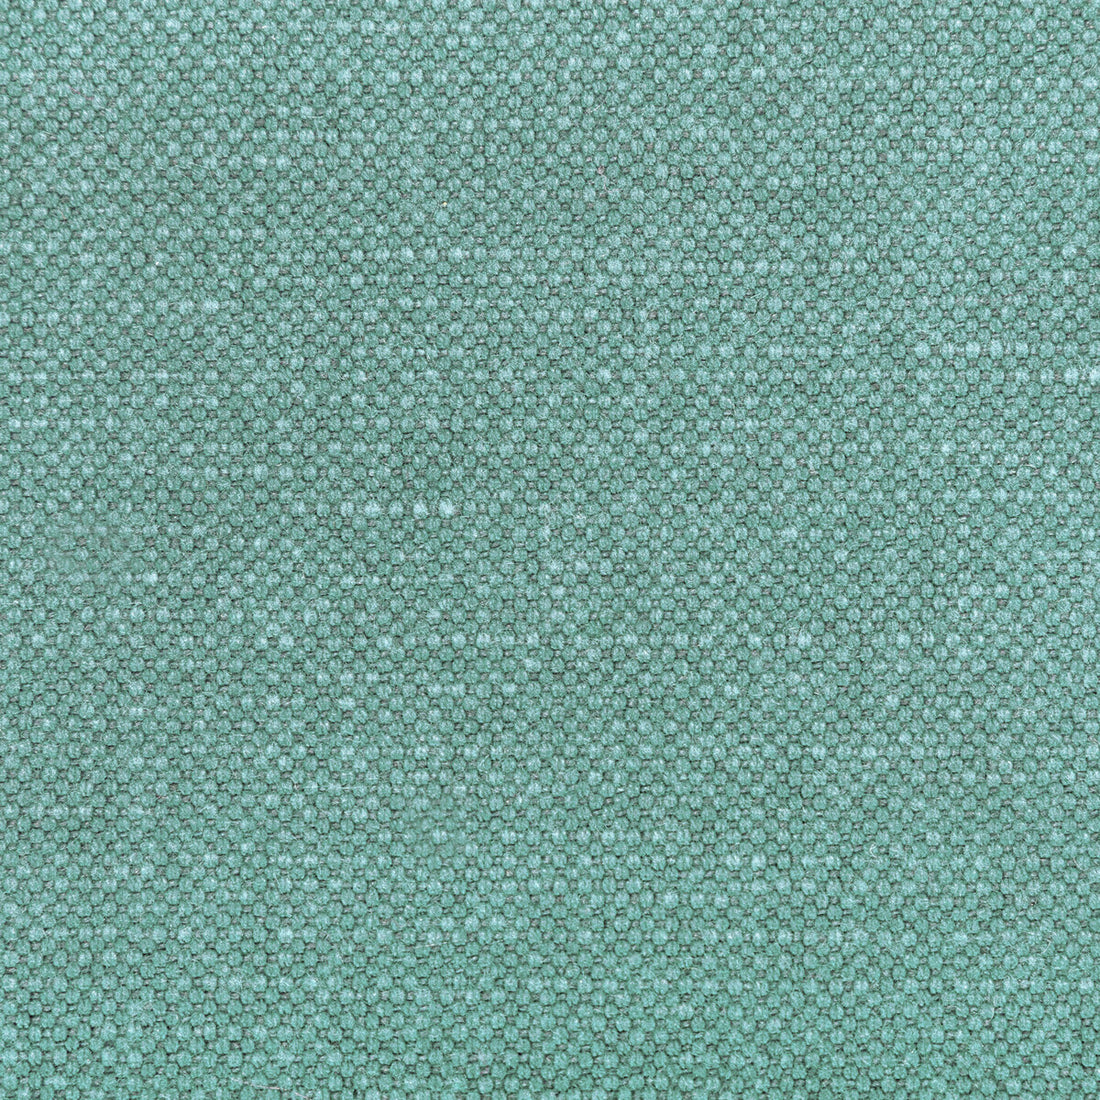 Carson fabric in canal color - pattern 36282.513.0 - by Kravet Basics